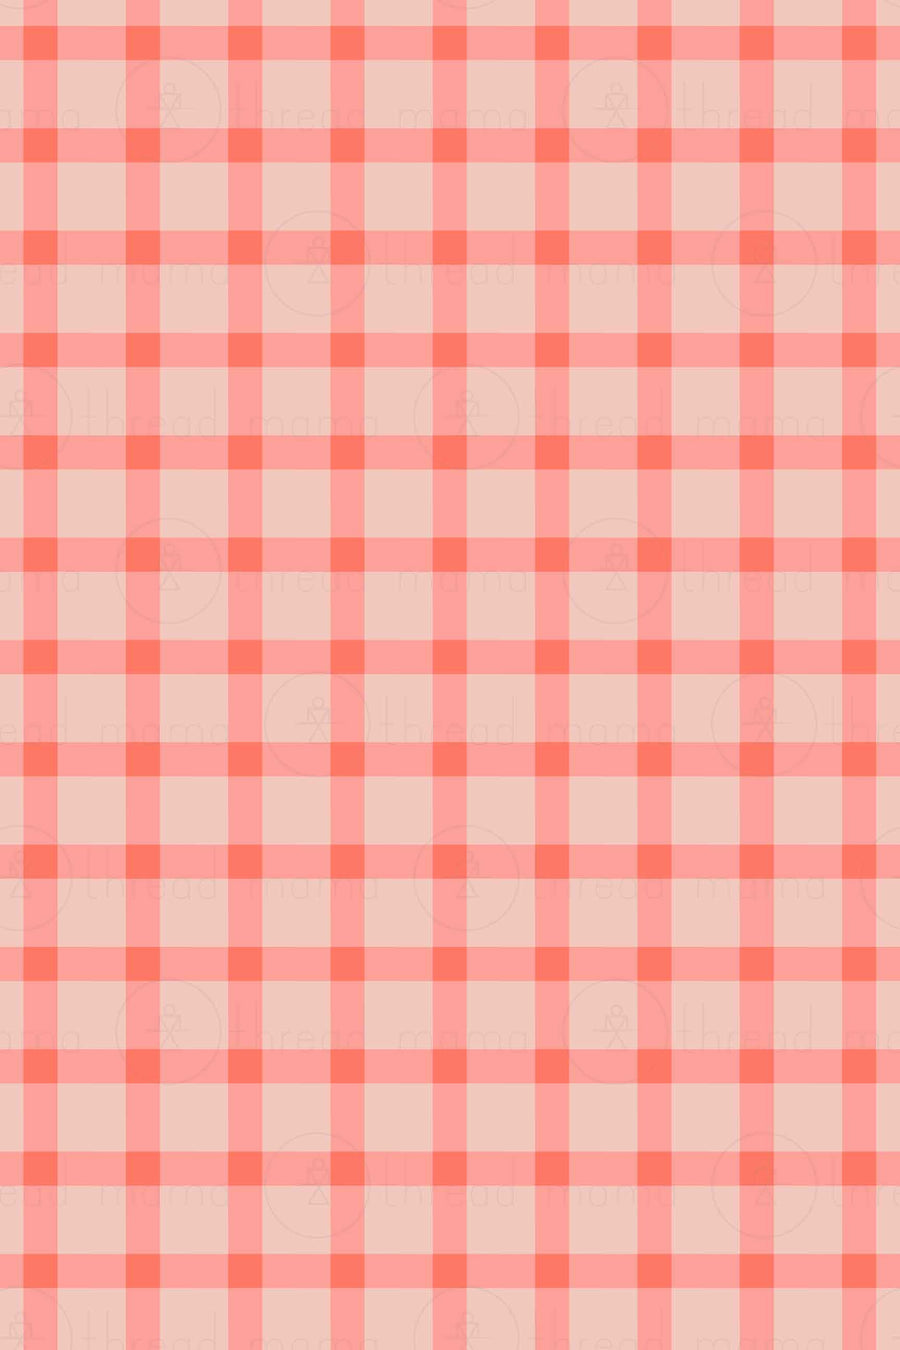 Repeating Pattern 161 (Seamless)